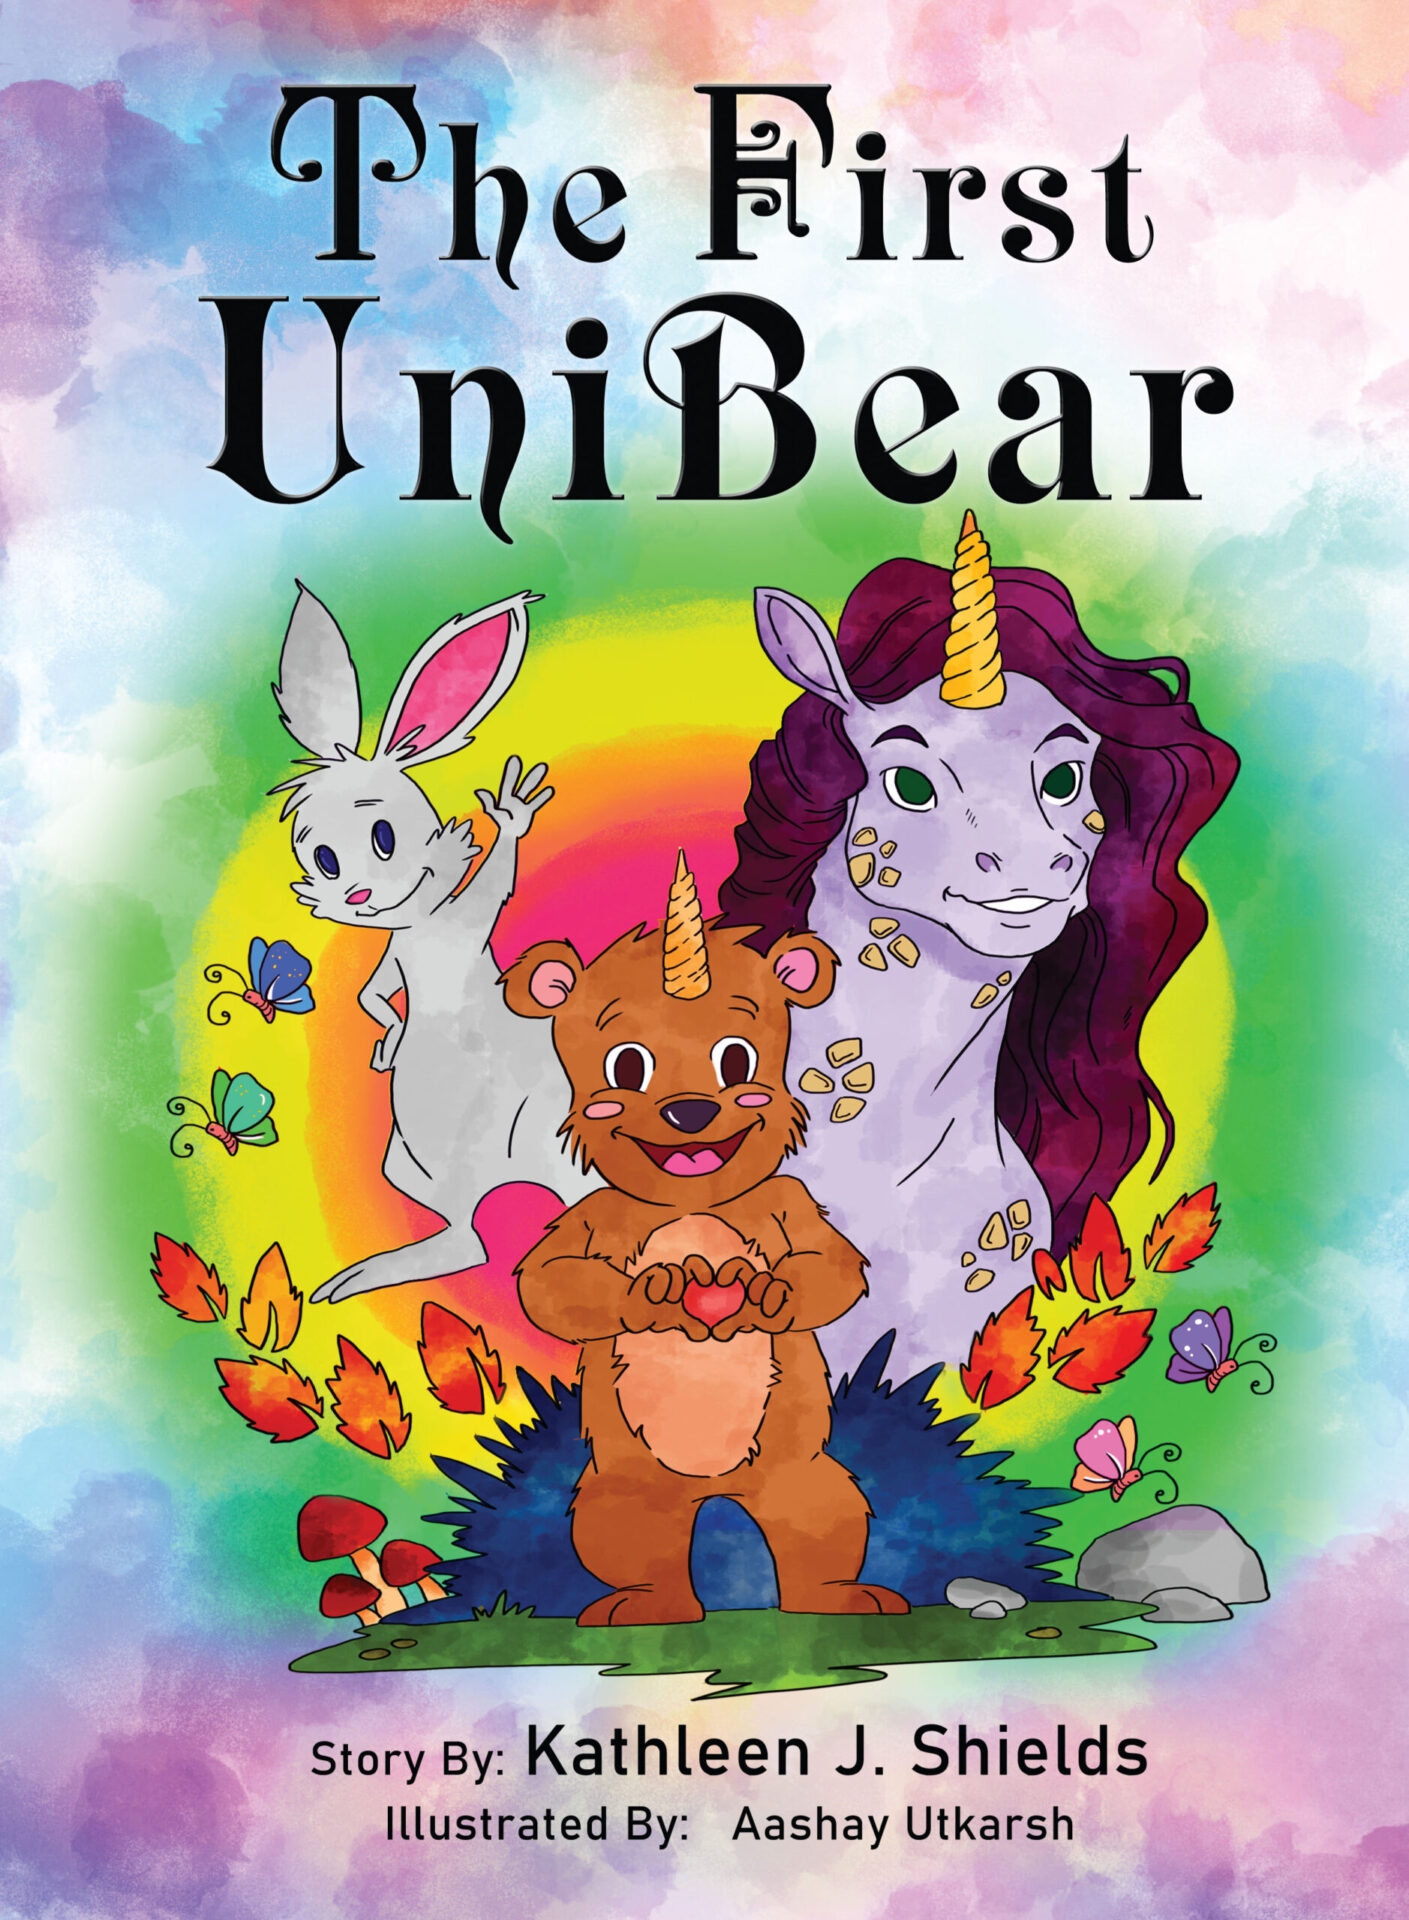 The First Unibear Rhyming Illustrated Story Book by author Kathleen J. Shields